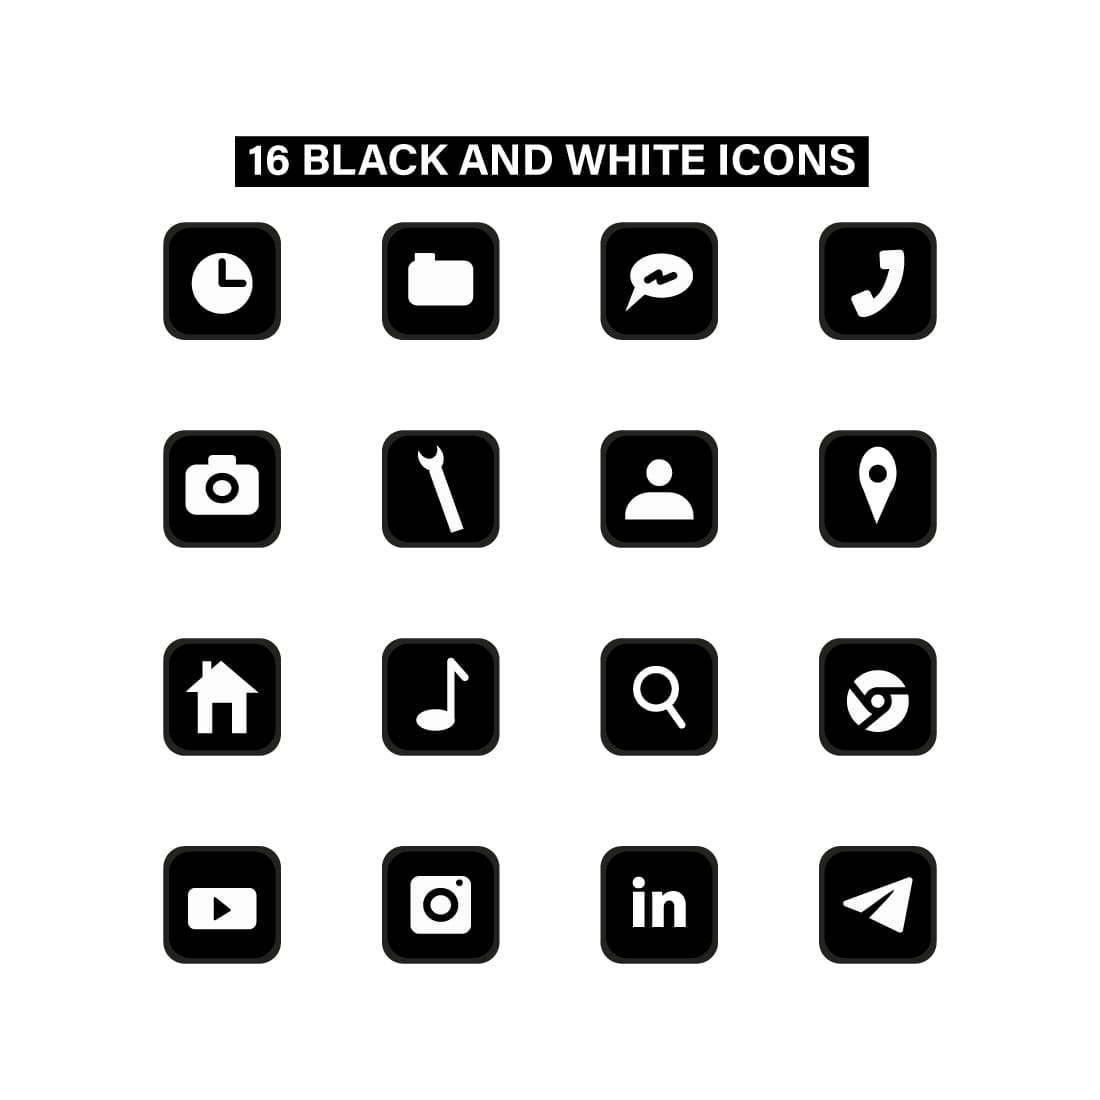 Free black and white icons main cover.